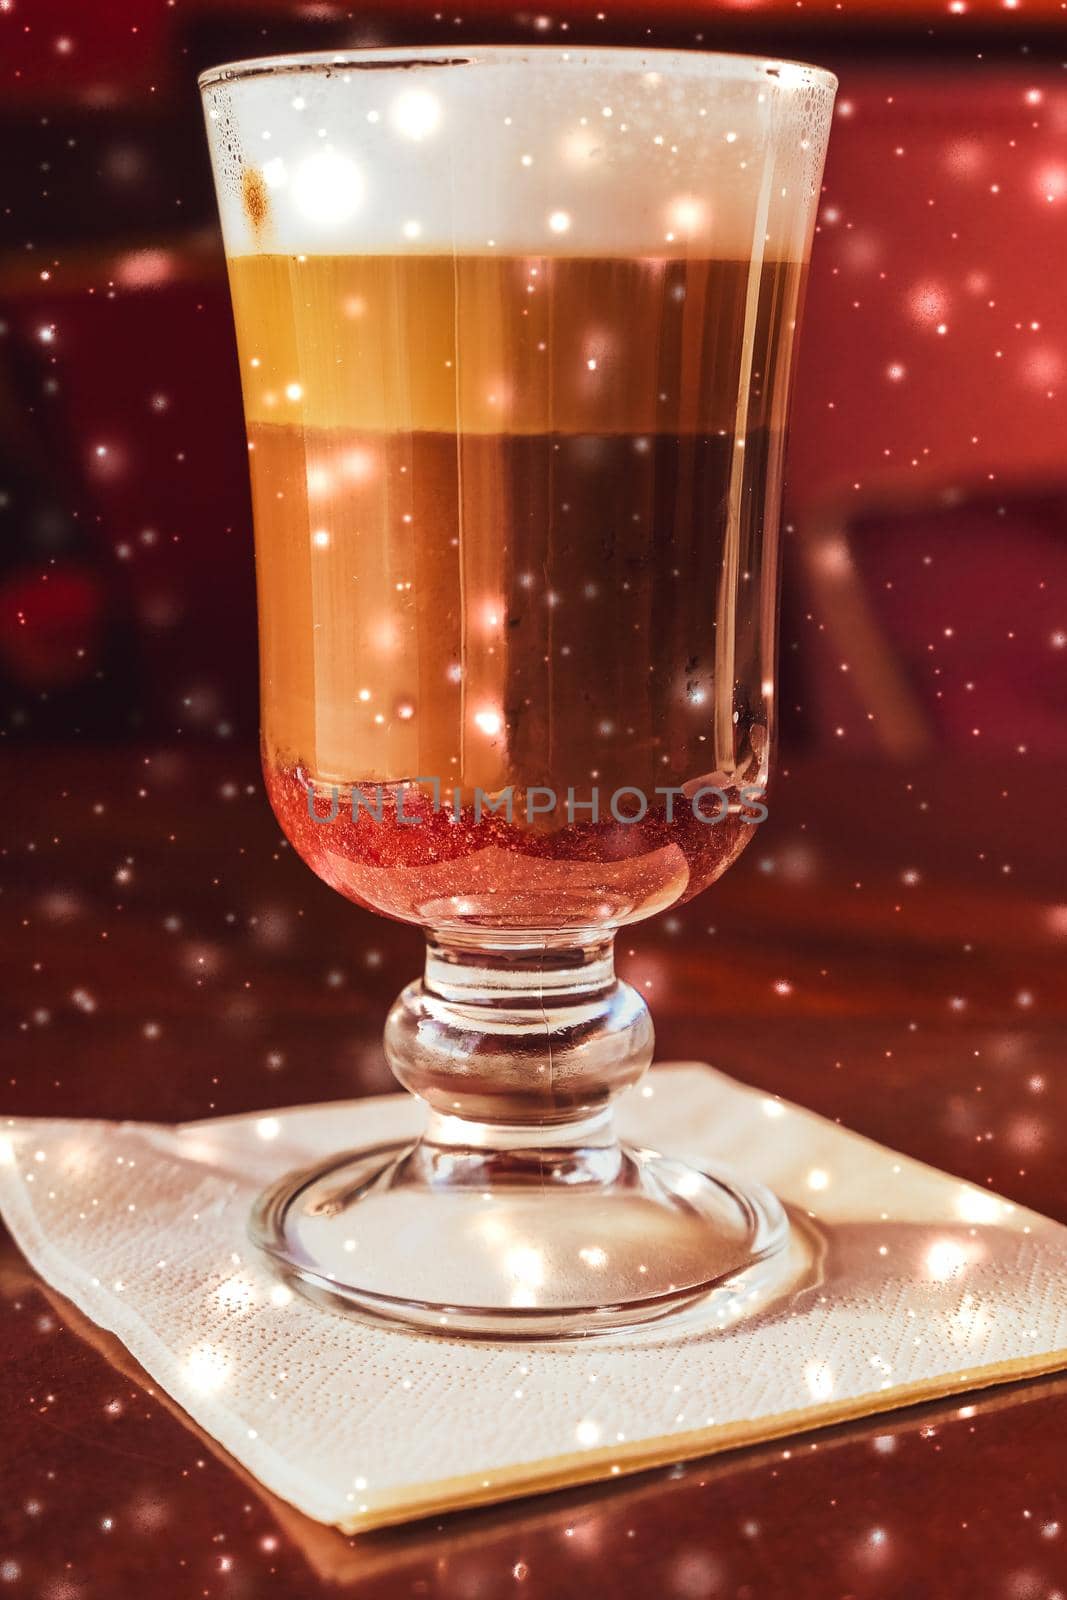 Hot drink, New Years Eve and Valentines Day celebration concept - Winter holiday latte coffee glass and glowing snow in a restaurant, Christmas time menu recipe